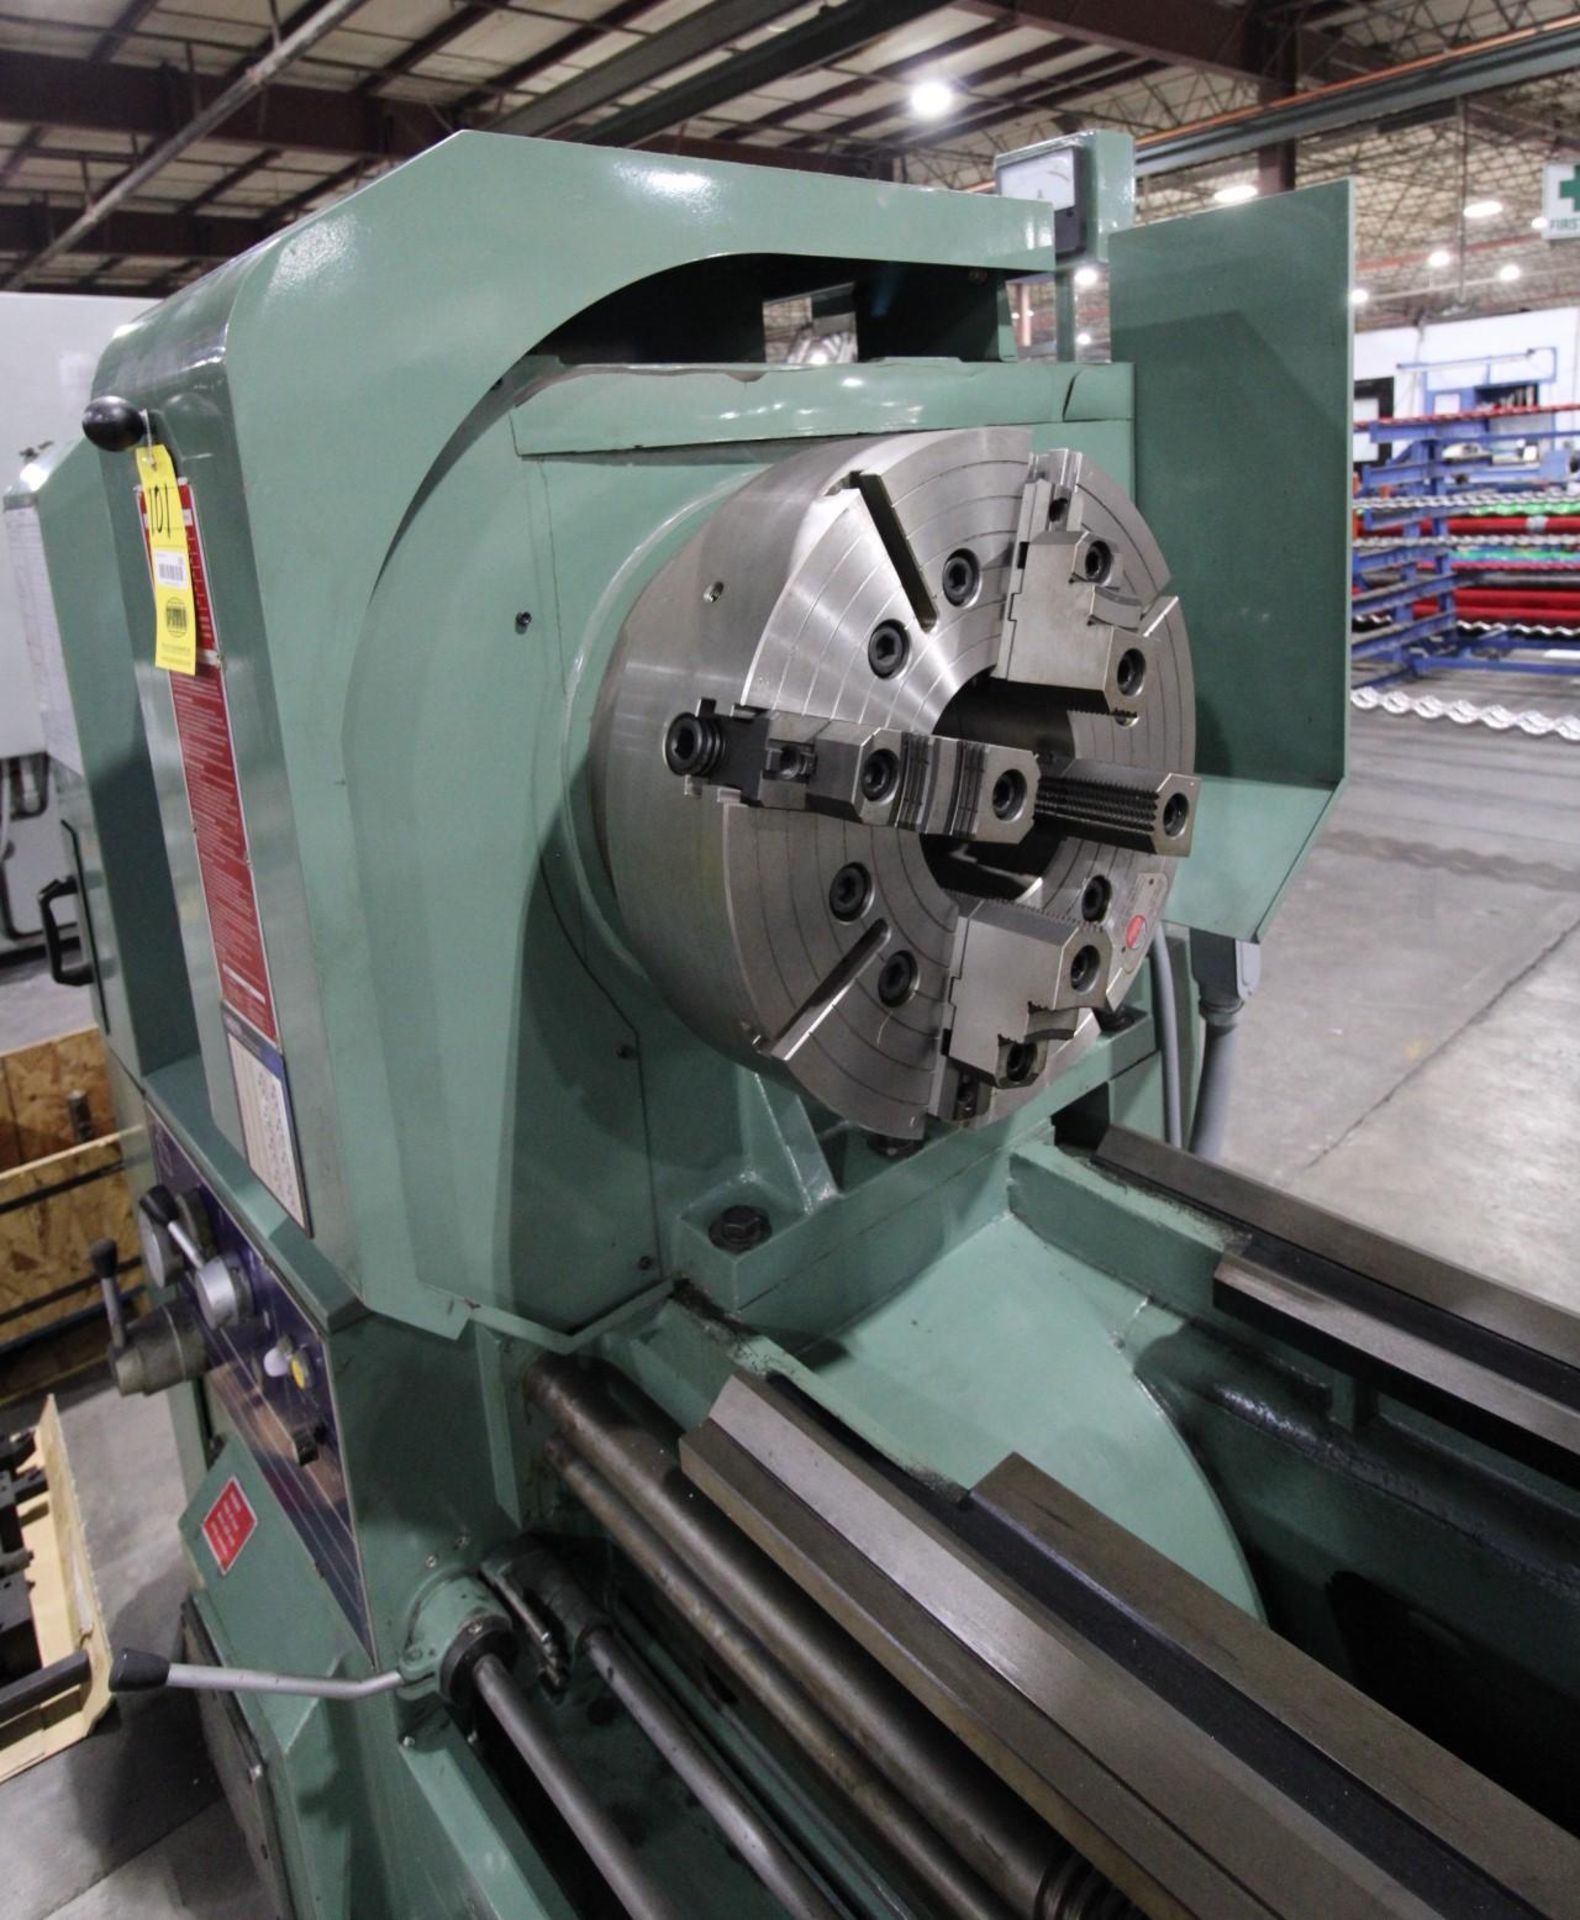 HOLLOW SPINDLE LATHE, KINGSTON HEAVY DUTY 34 HP-2000, new 2014, never used in production, 7-1/4" sp - Image 9 of 23